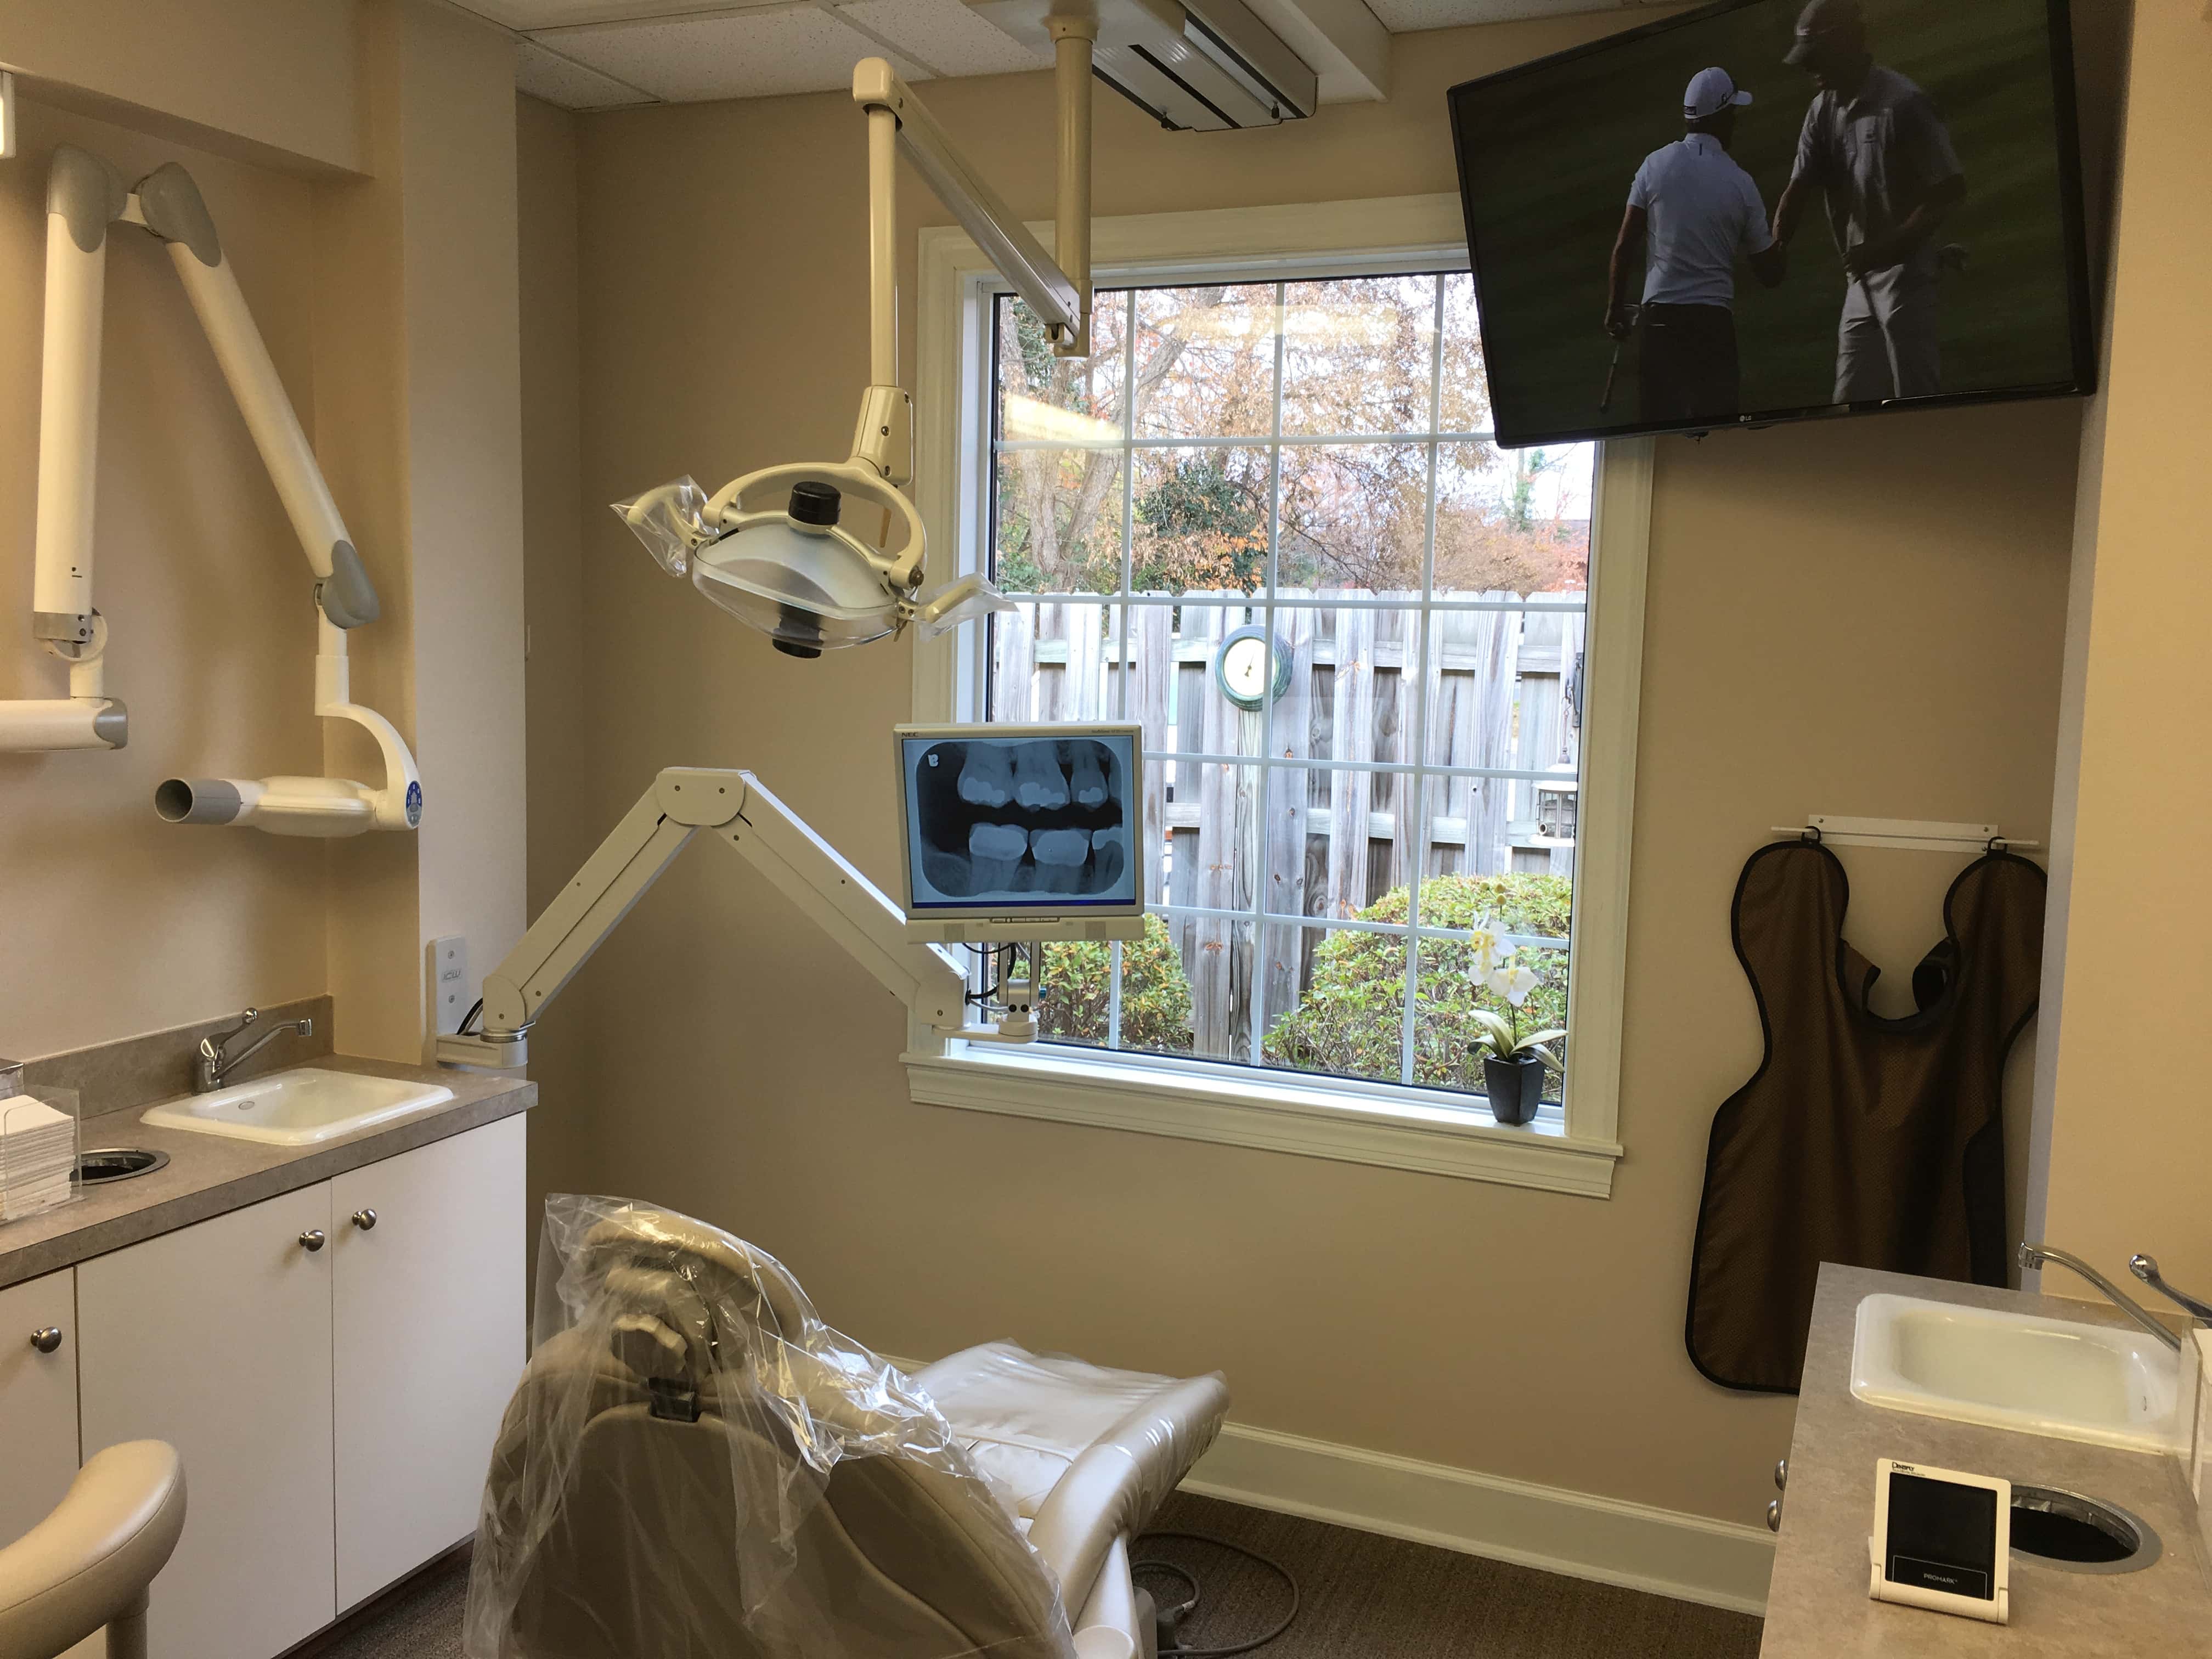 Curtis Family Dentistry - Mooresville, NC, US, affordable dental